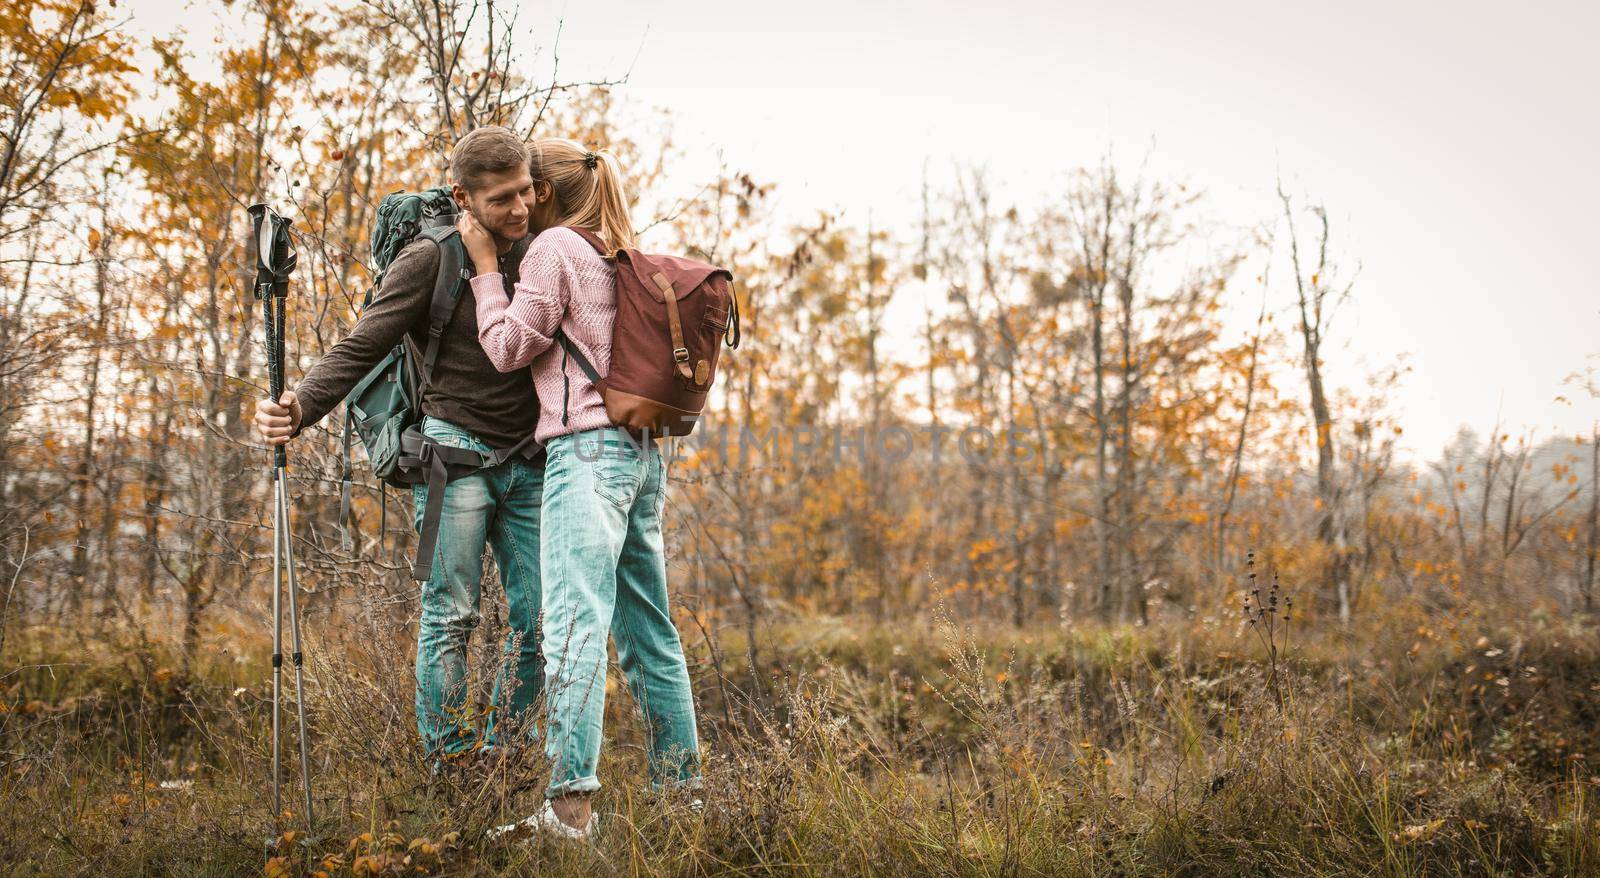 Traveling Couple Stopped To Relax In A Forest Glade, A Blonde Hugged Her Husband Kissing Him Or Saying Something In His Ear, Man Stands Leaning On Hiking Pools